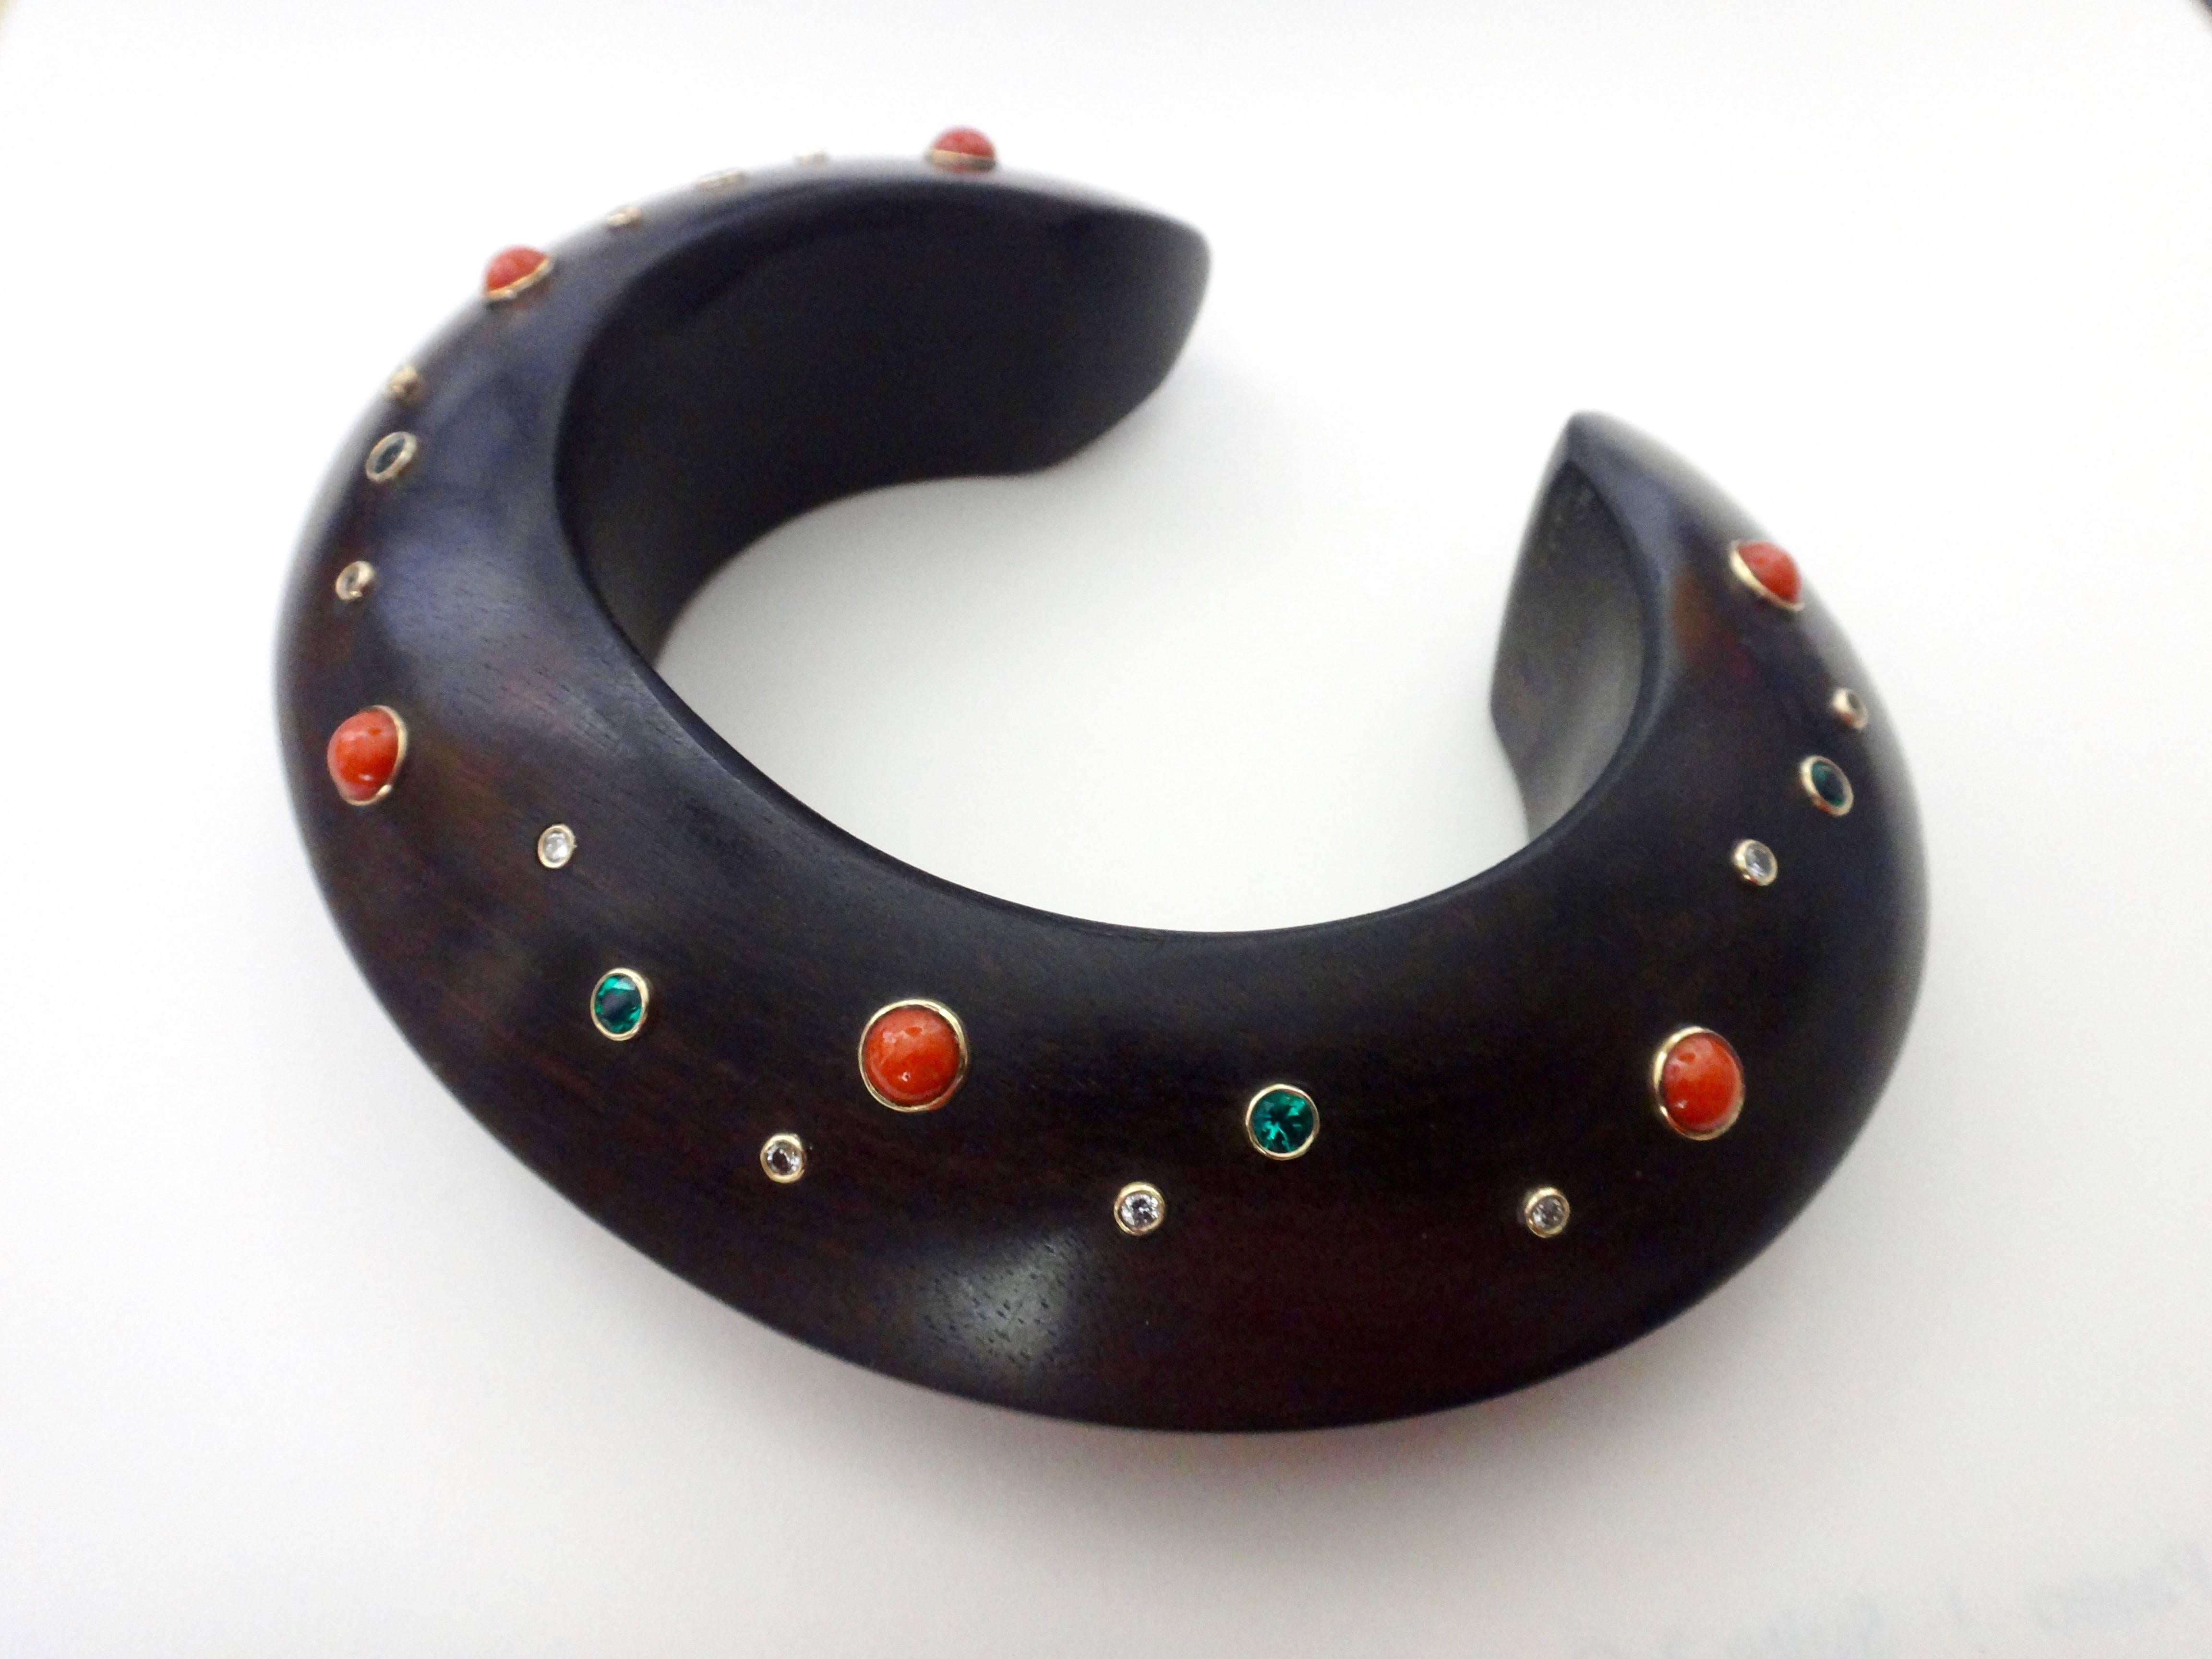 A carved ebony cuff is decorated with bezel set, faceted emeralds, Mediterranean red coral along with diamonds in this ethnically inspired bracelet.  The inside diameter of the cuff is 6 1/2 inches with an opening of 1 1/4 inches to fit an average